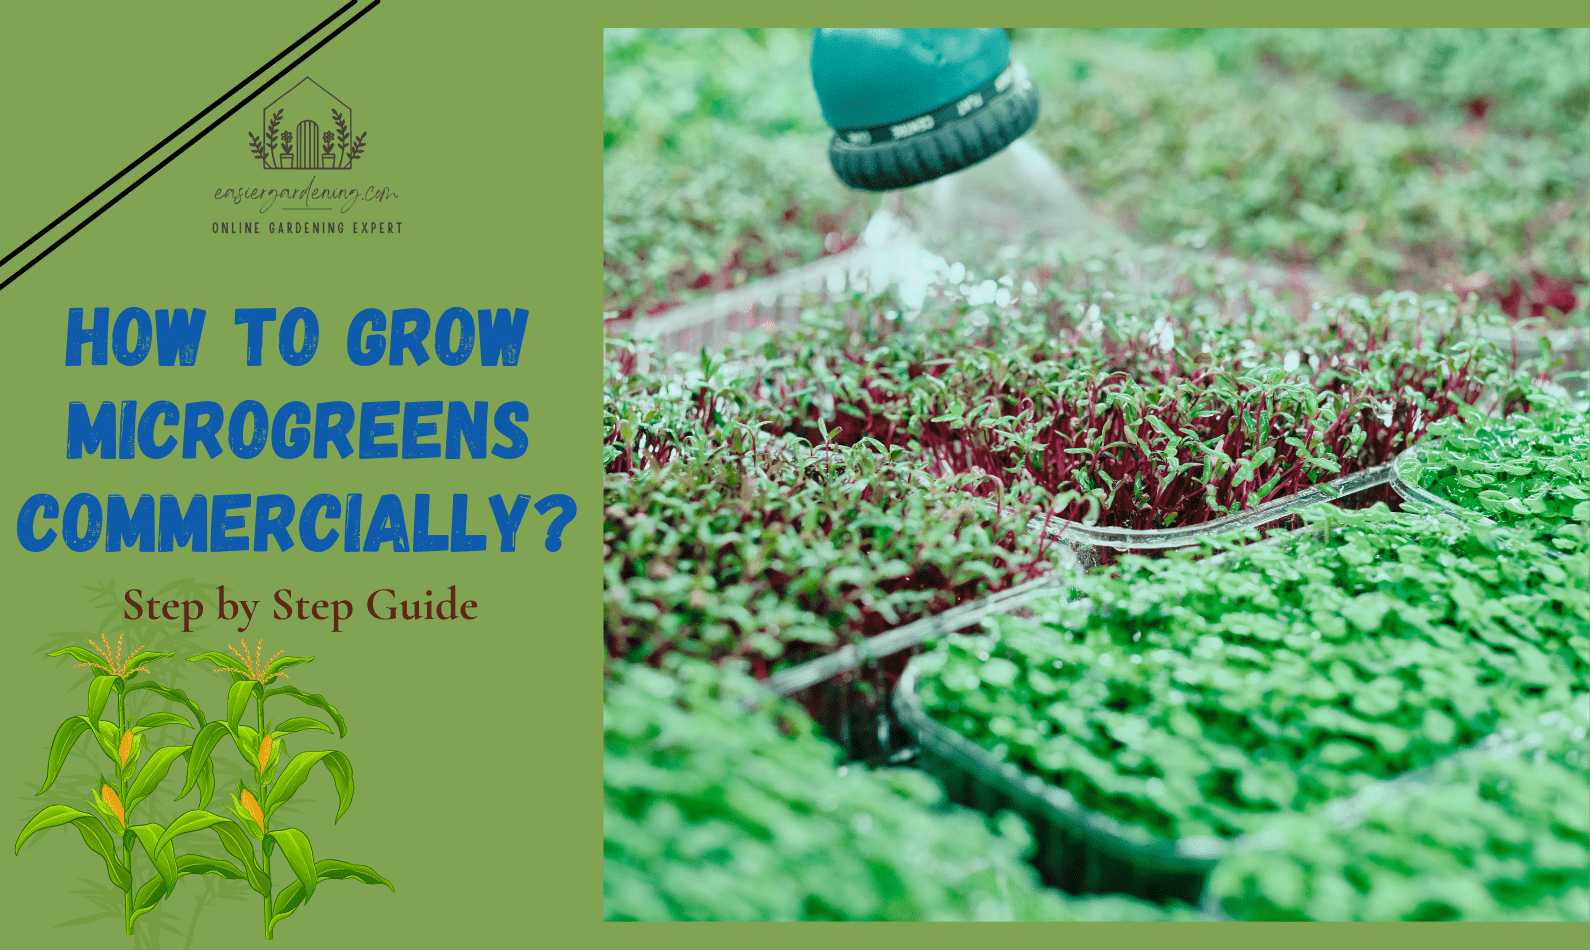 How to Grow Microgreens Commercially?